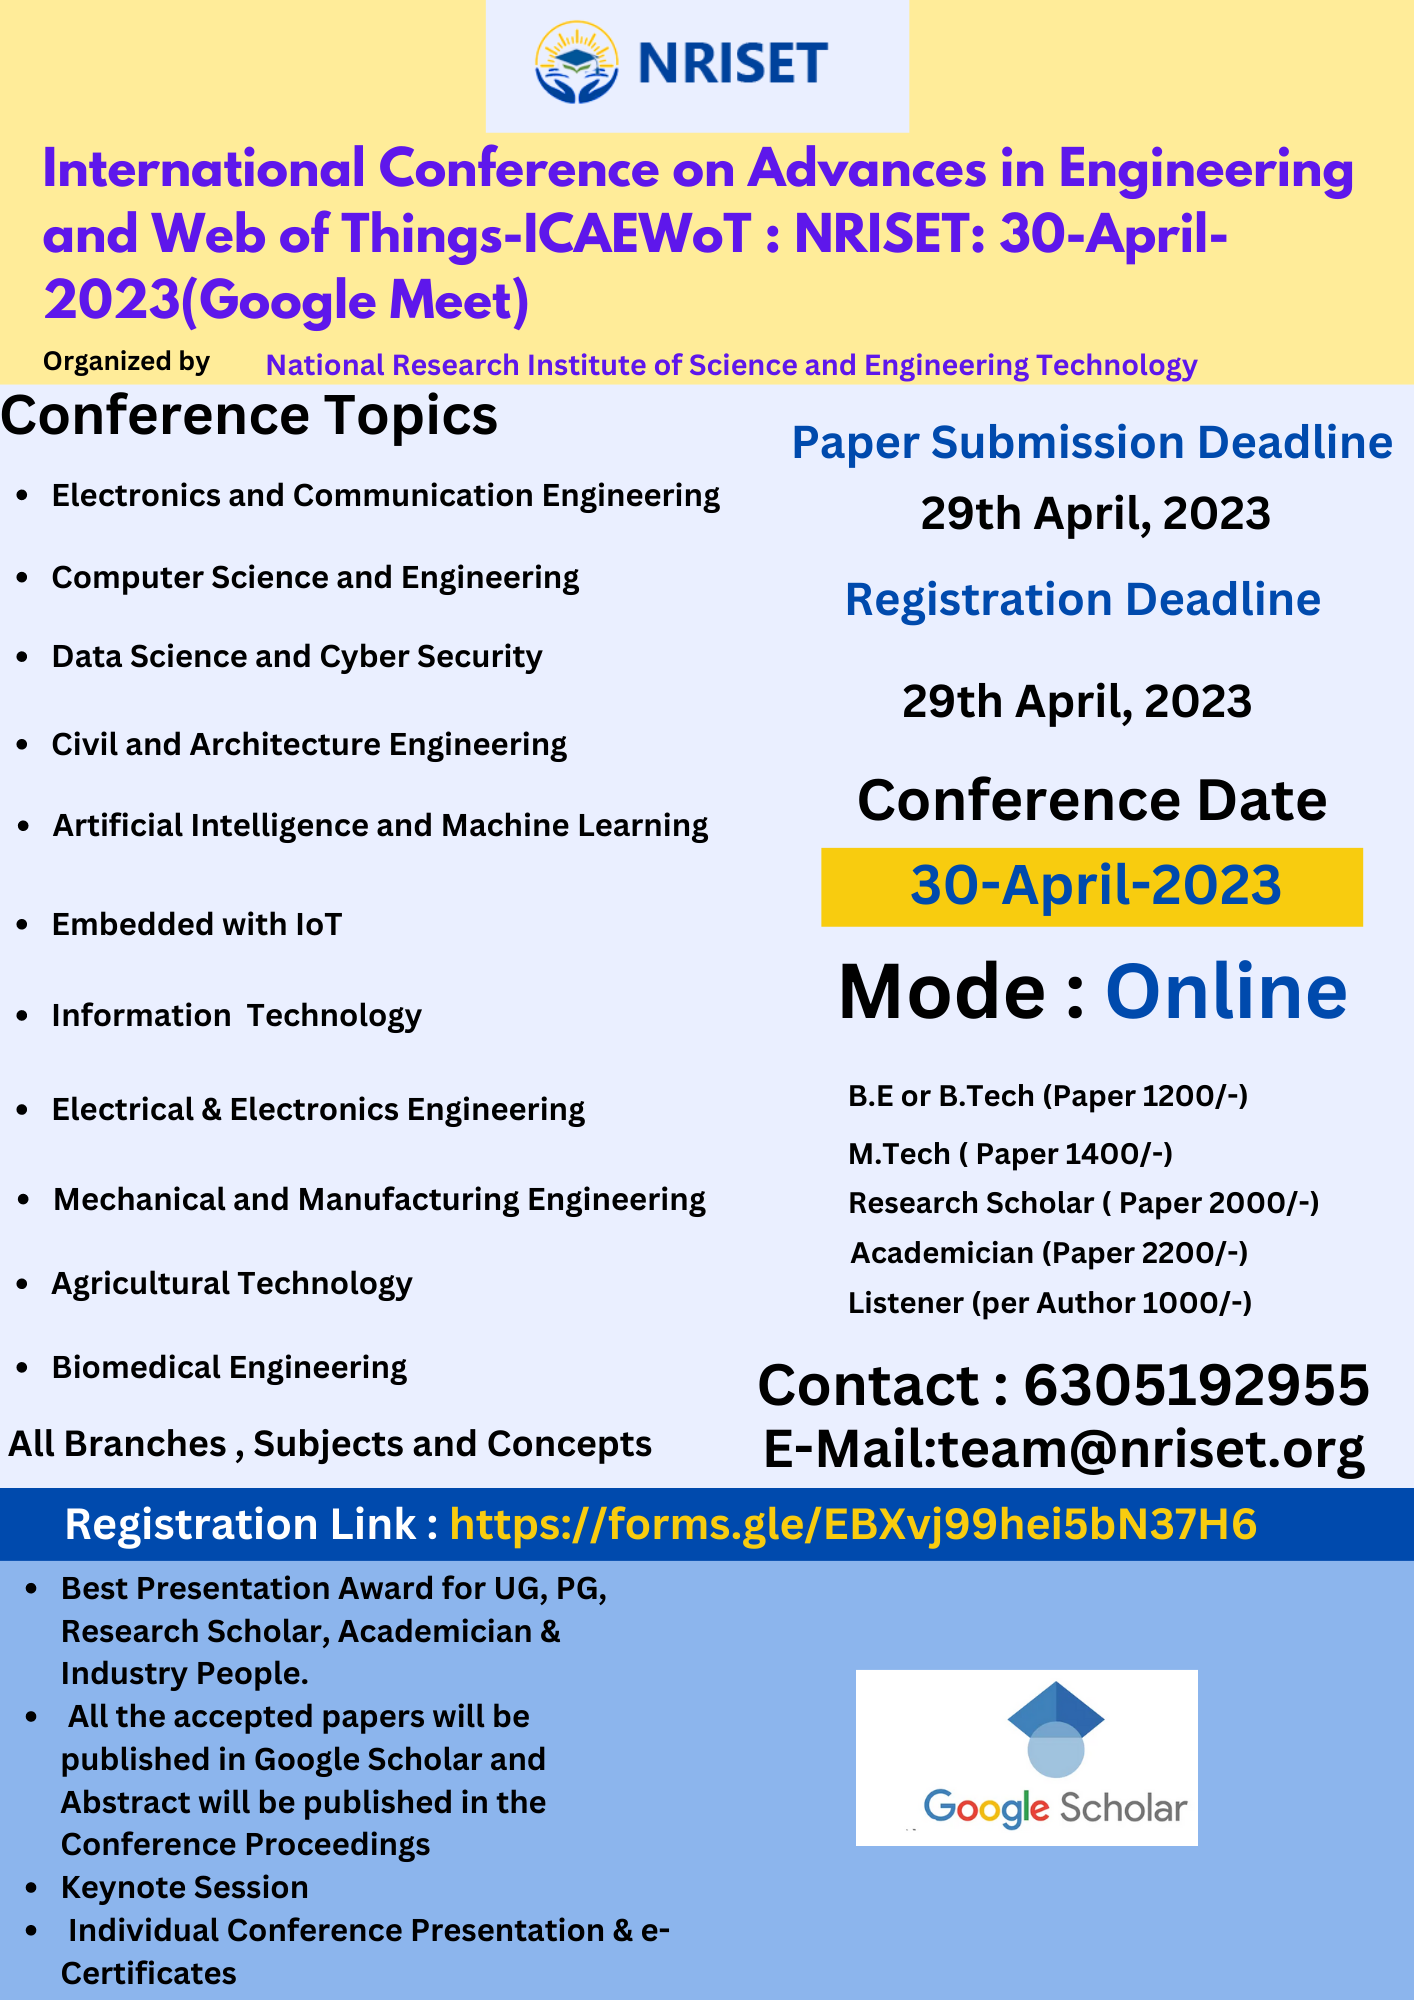 International Conference on Advances in Engineering and Web of Things-ICAEWoT 2023